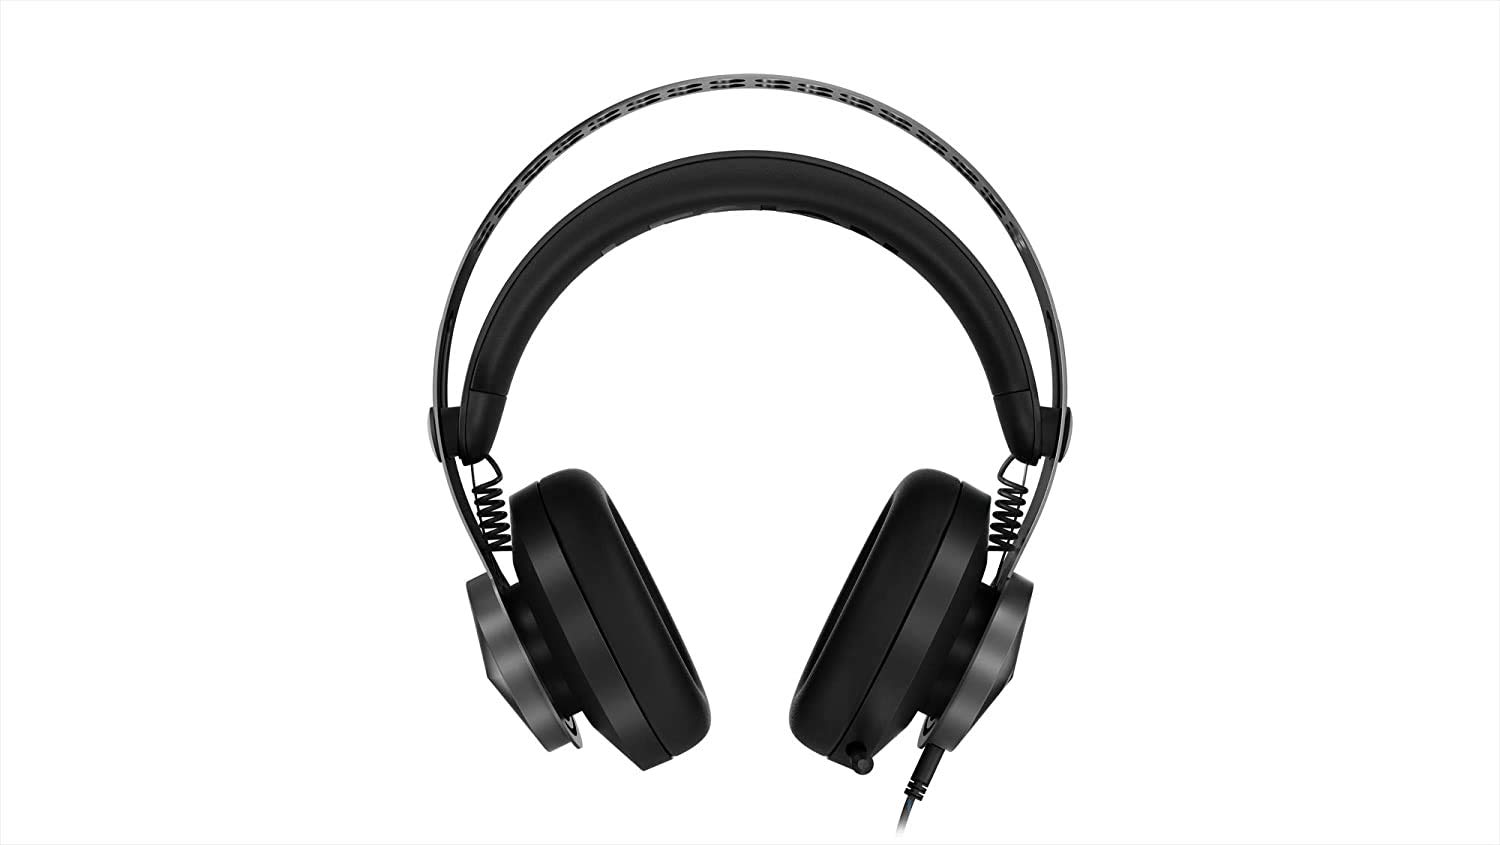 Lenovo Legion H500 PRO 7.1 Surround Sound Gaming Headset, Noise-Cancelling Mic, Memory Foam & PU Leather Earcups, Stainless Steel Headband, PC, PS4, Xbox One, Nintendo Switch, GXD0T69864, Black